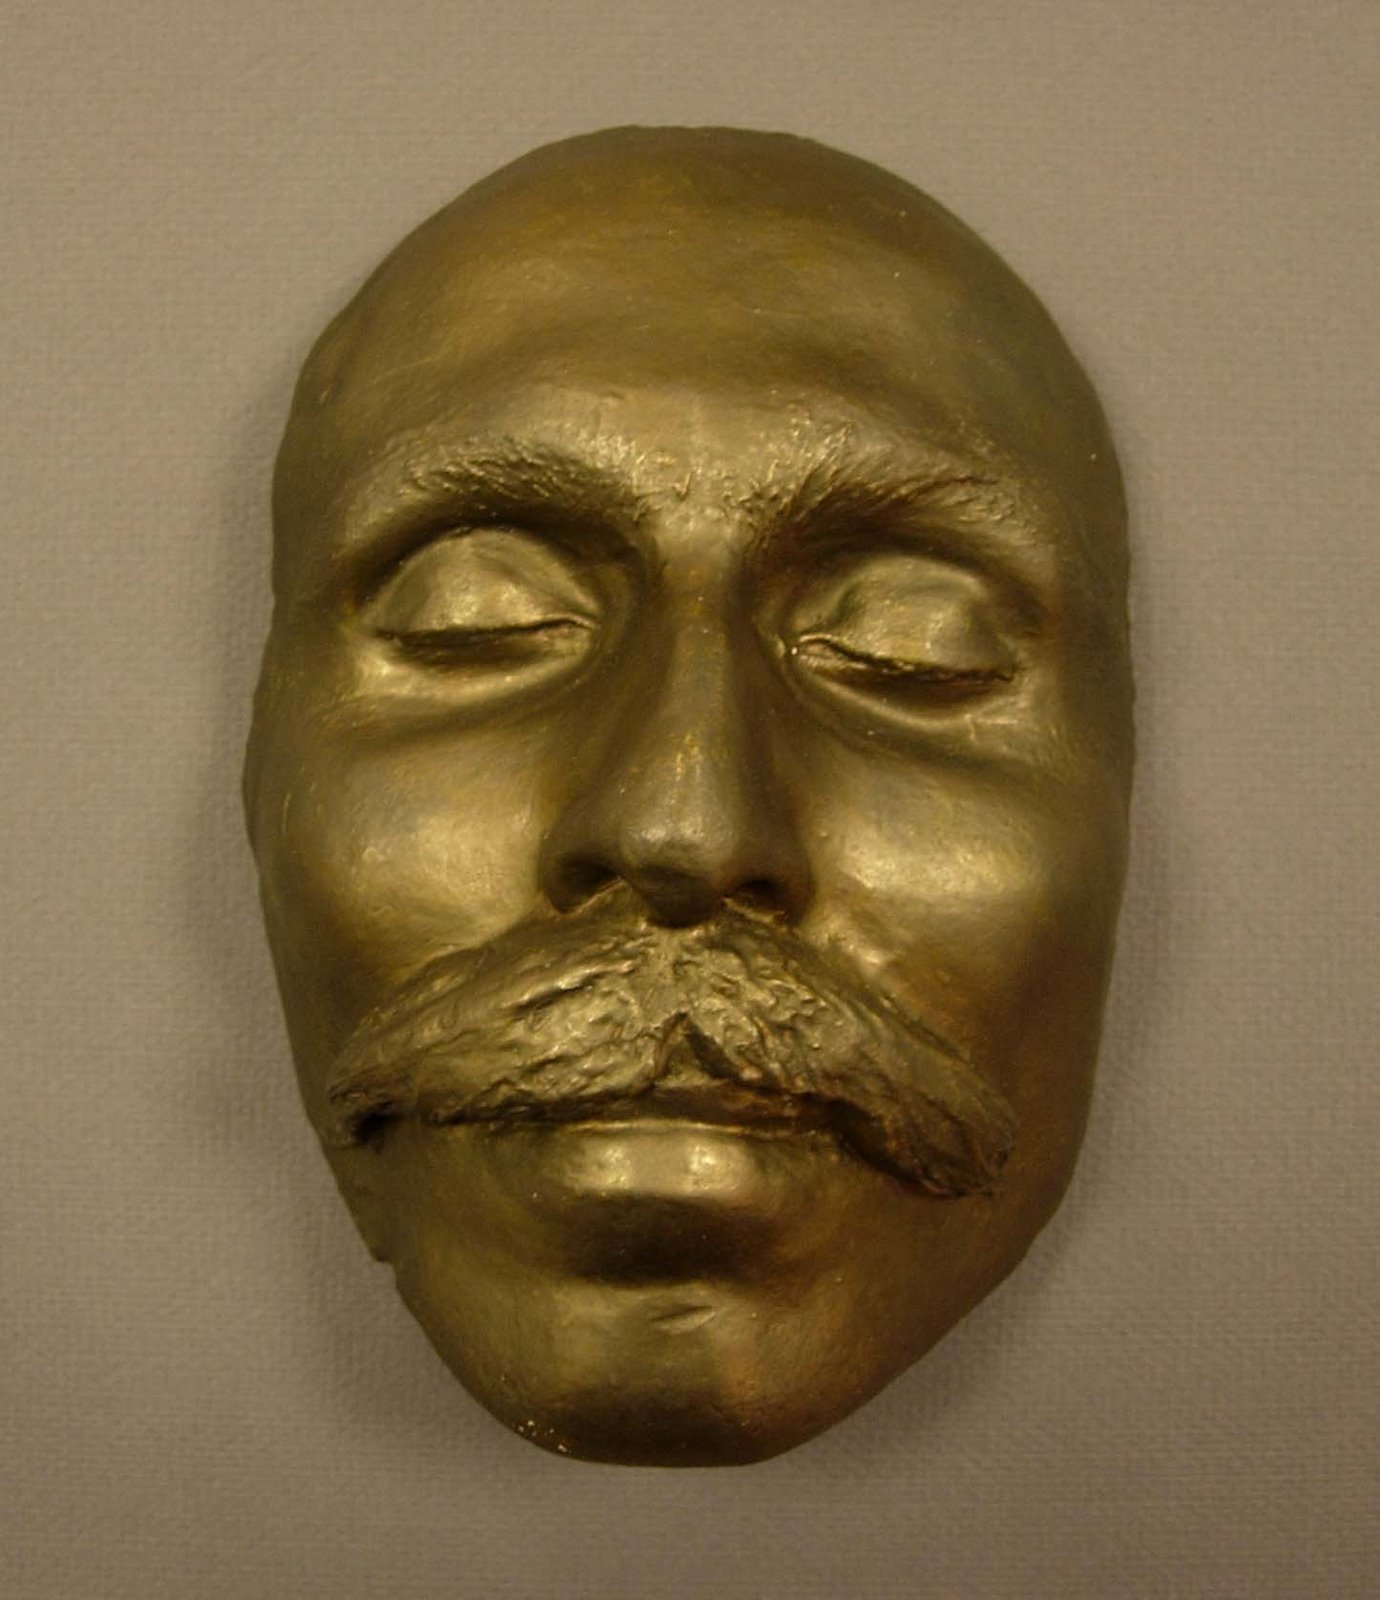 Color photograph of Vanzetti's cast-plaster death mask after his execution